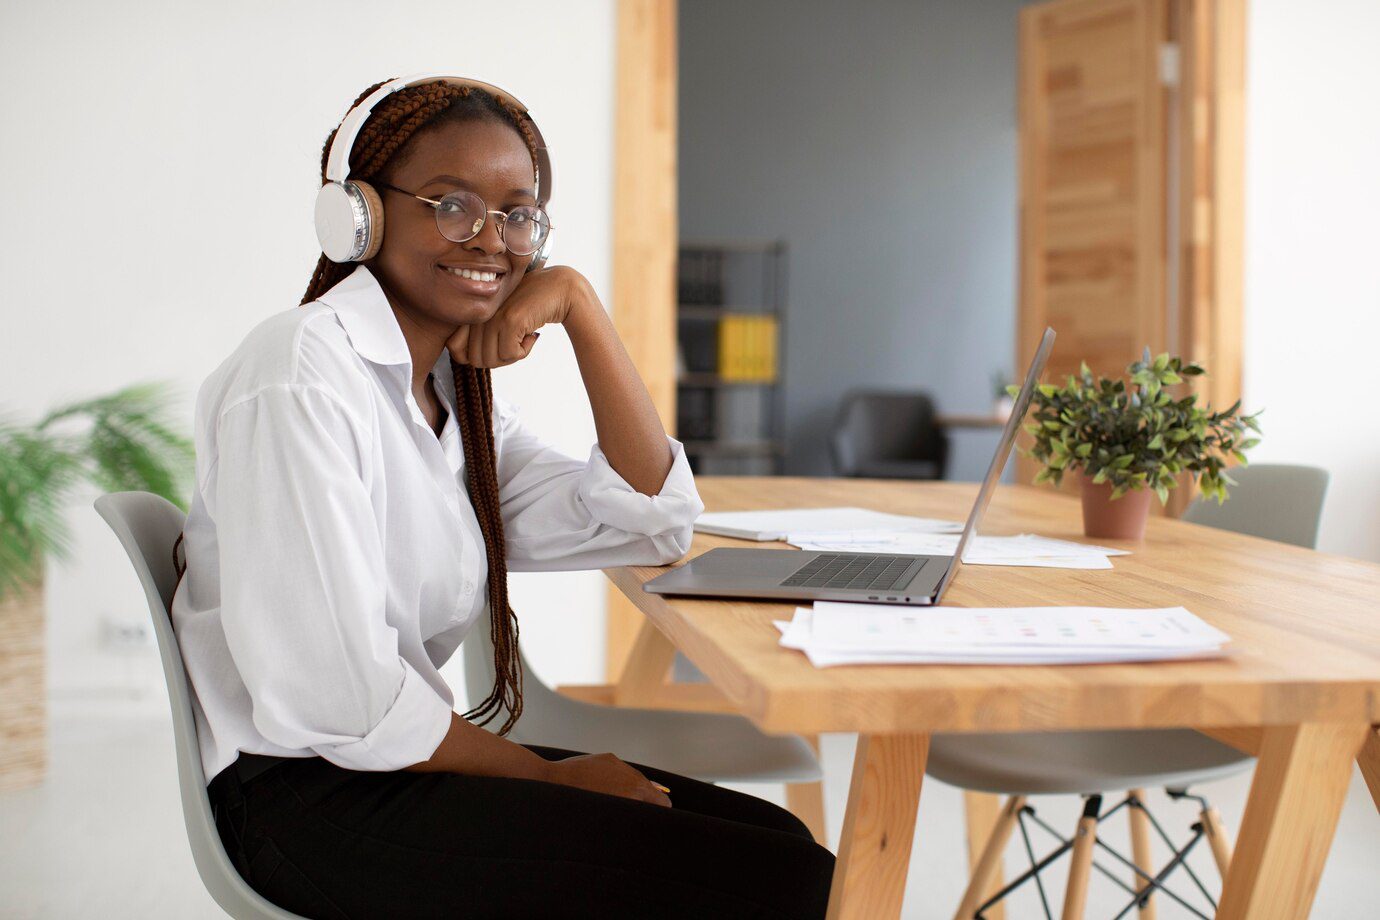 young-woman-working-with-her-headphones_23-2149116565